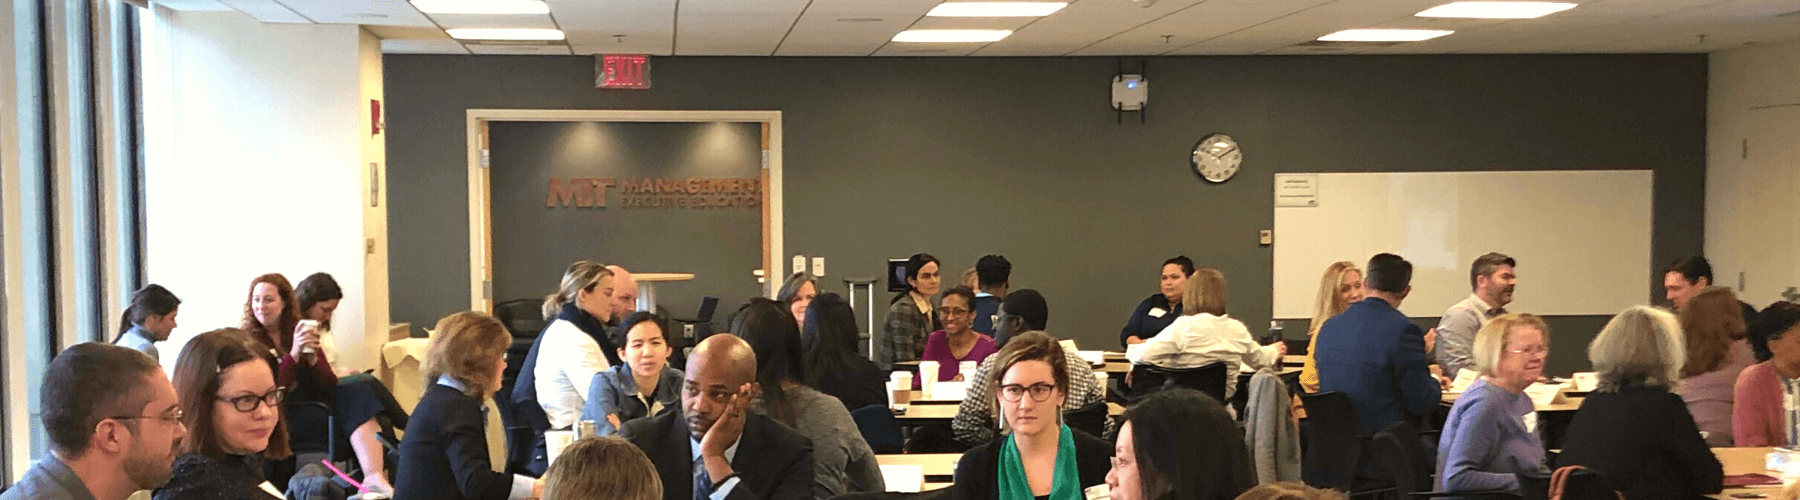 Classroom of MIT Executive MBA students participating in the Leading with Impact Program.